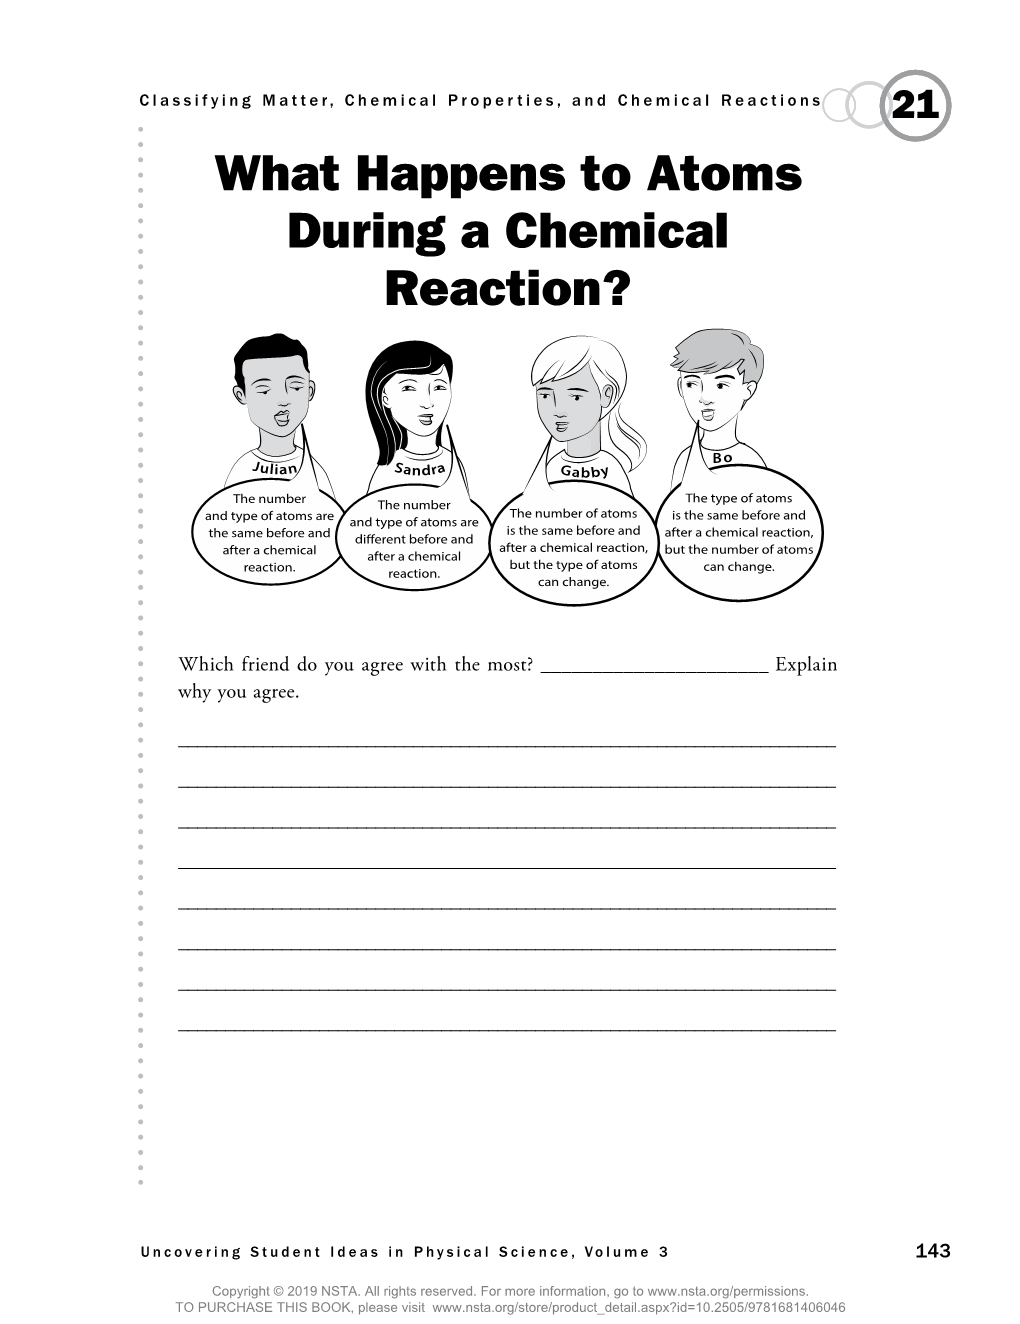 What Happens to Atoms During a Chemical Reaction?